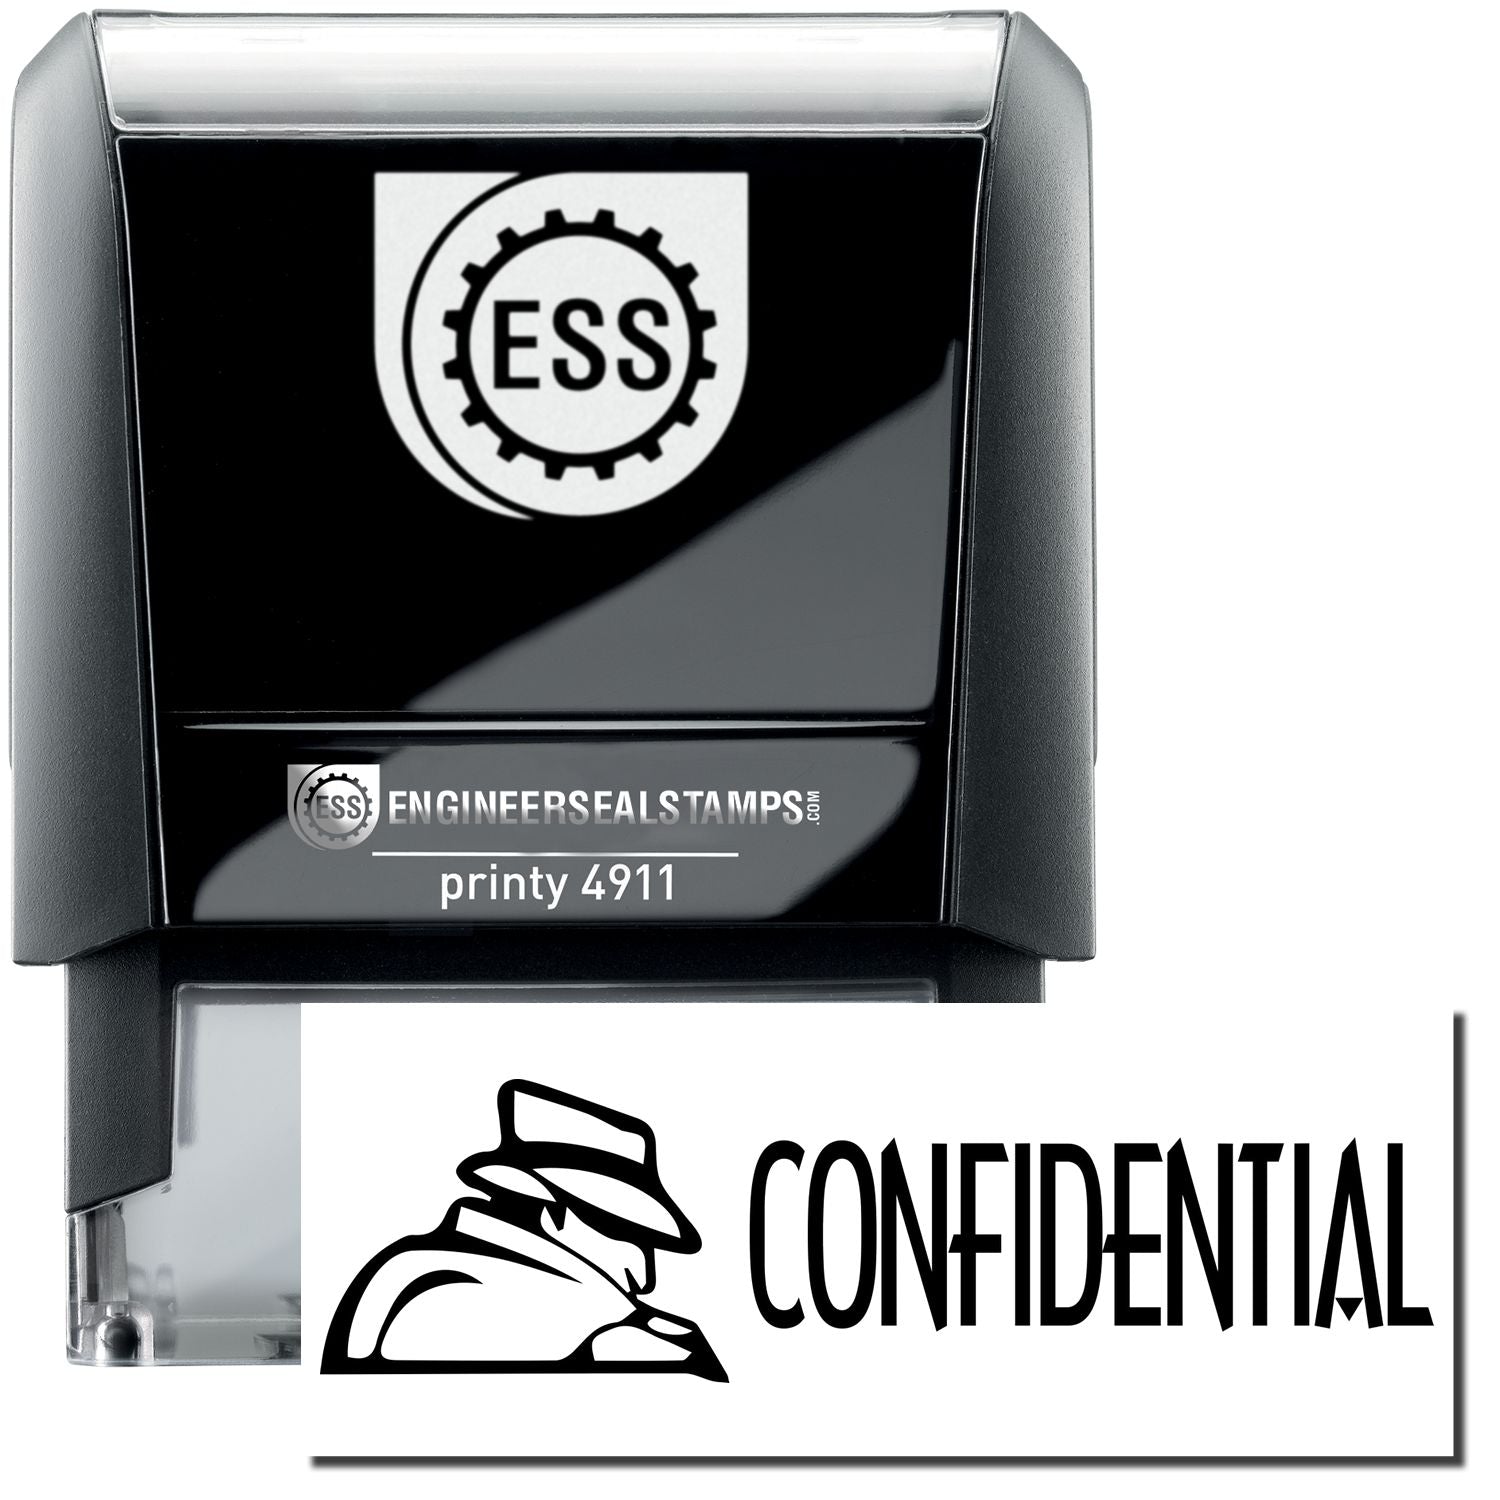 A self-inking stamp with a stamped image showing how the text "CONFIDENTIAL" with an eye-catching logo on the left side is displayed after stamping.